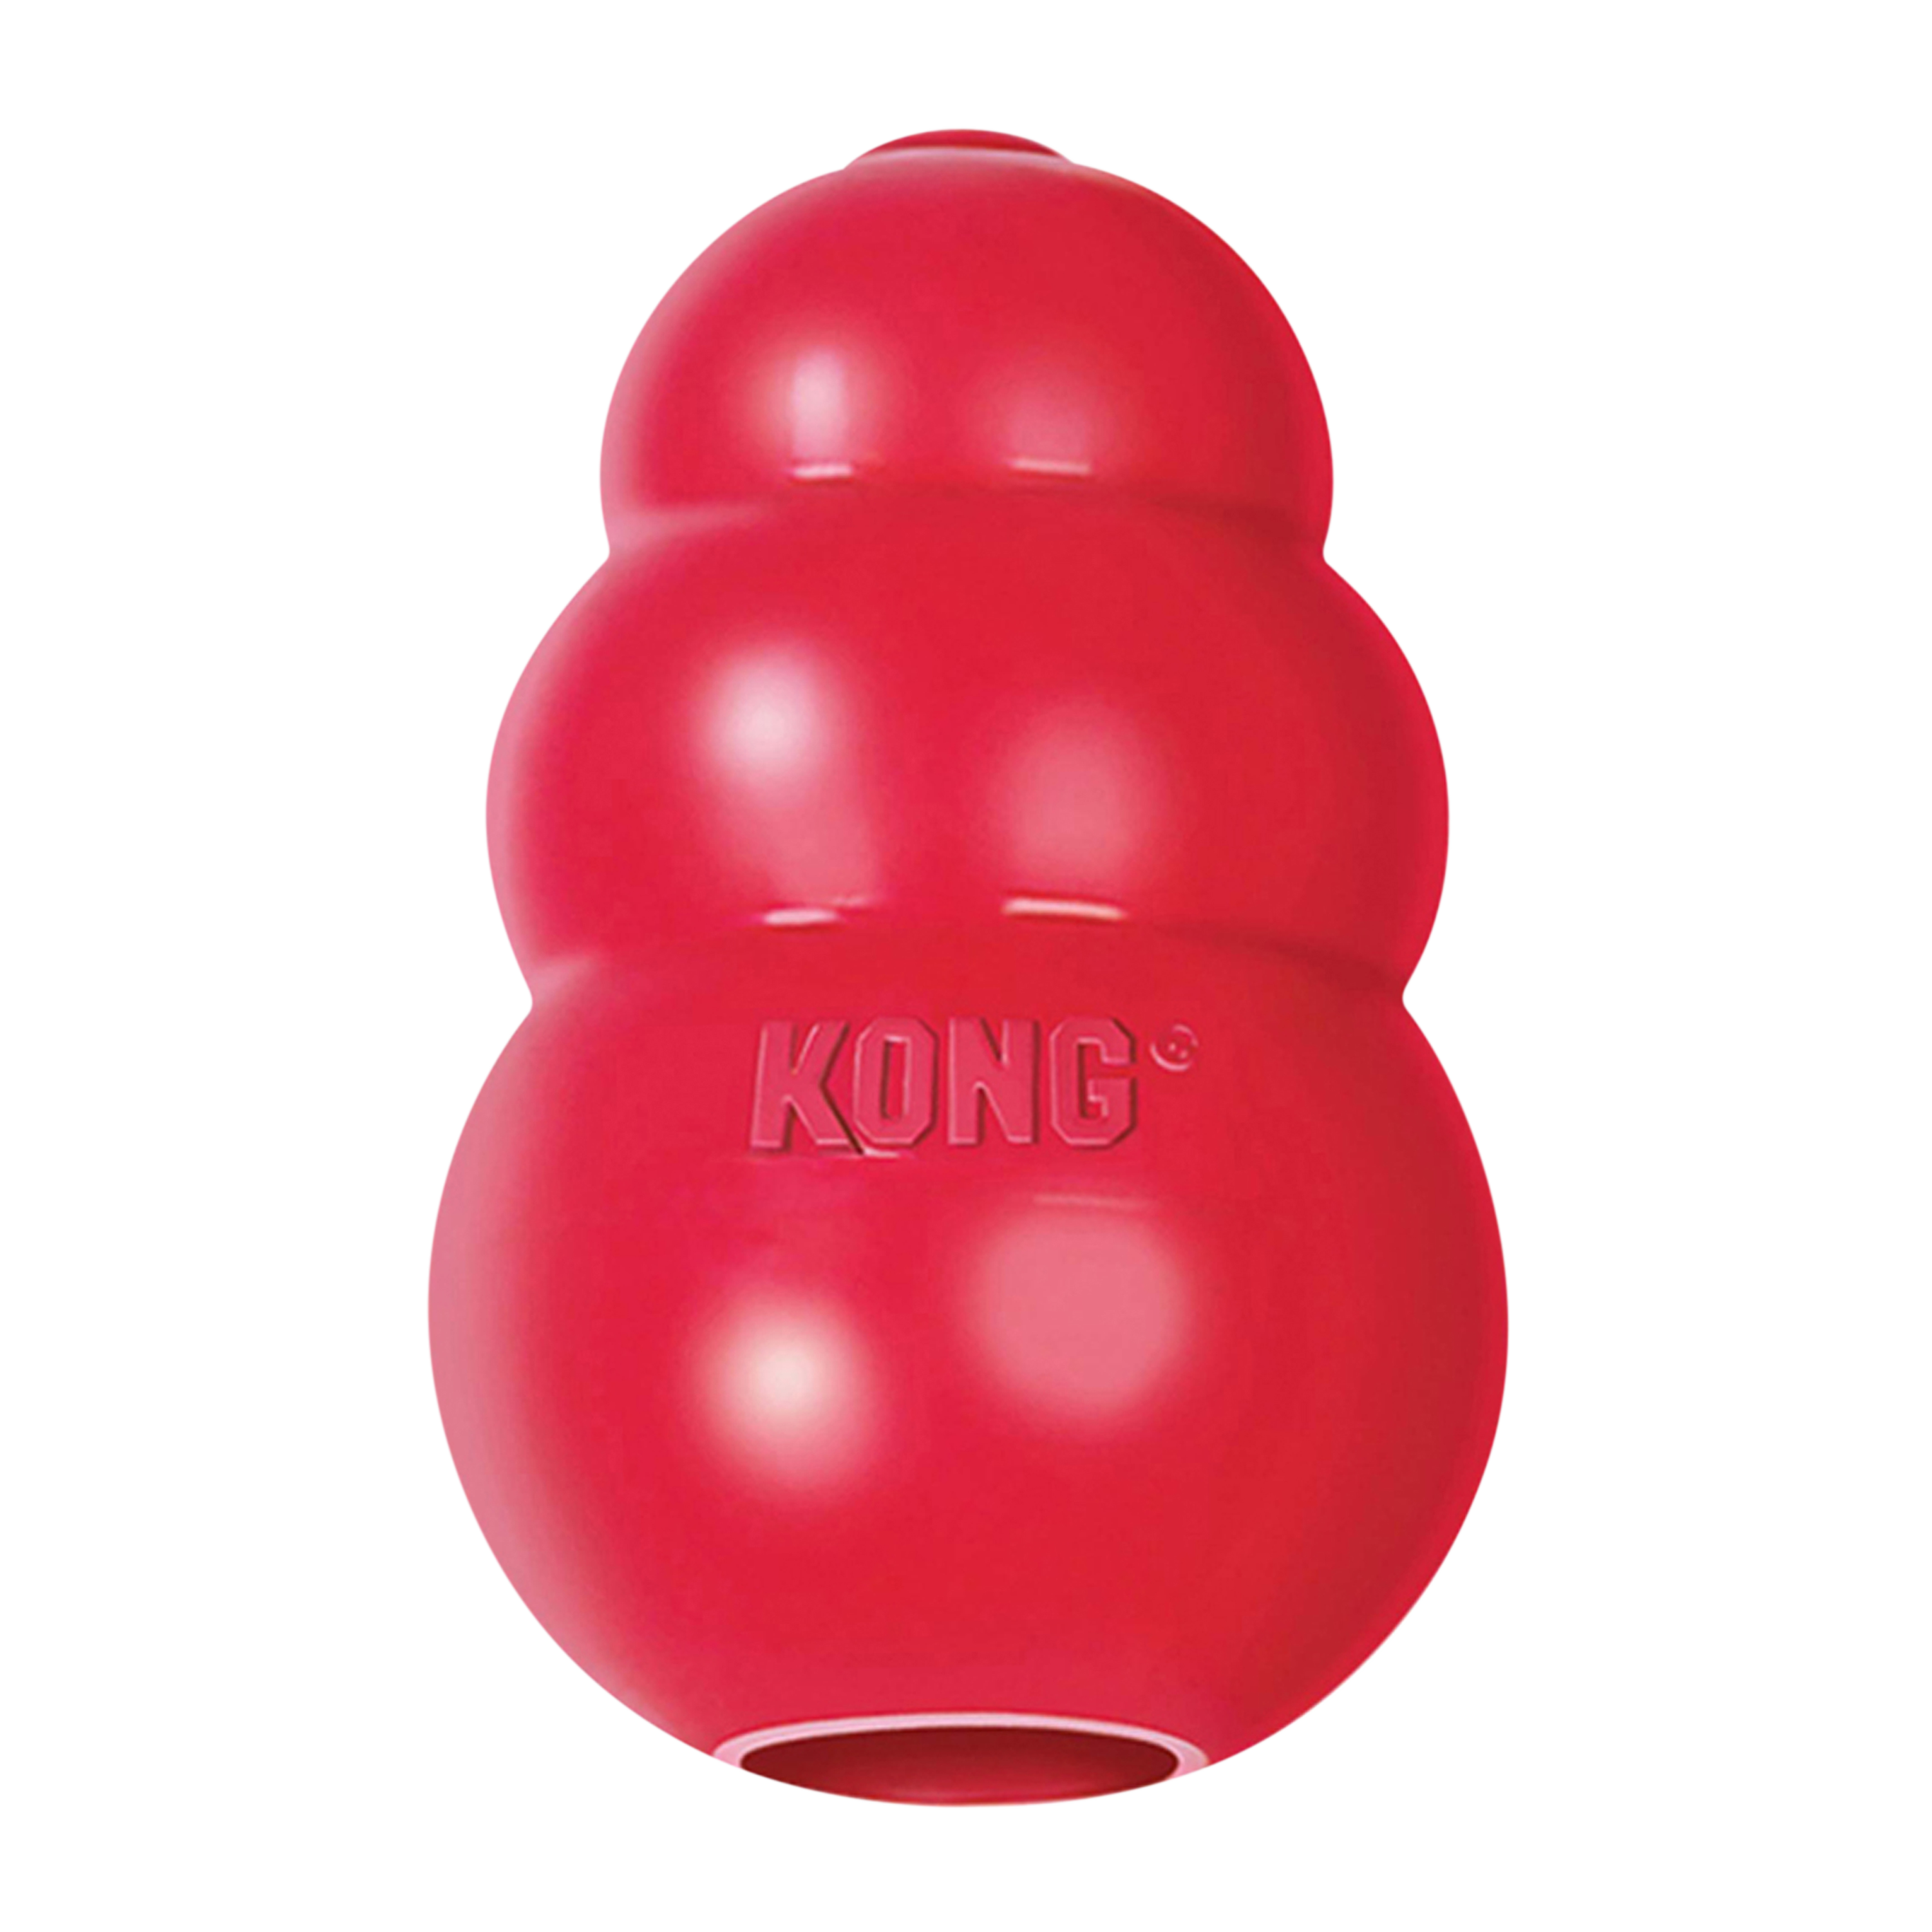 KONG Black Extreme Dog Toy, Small